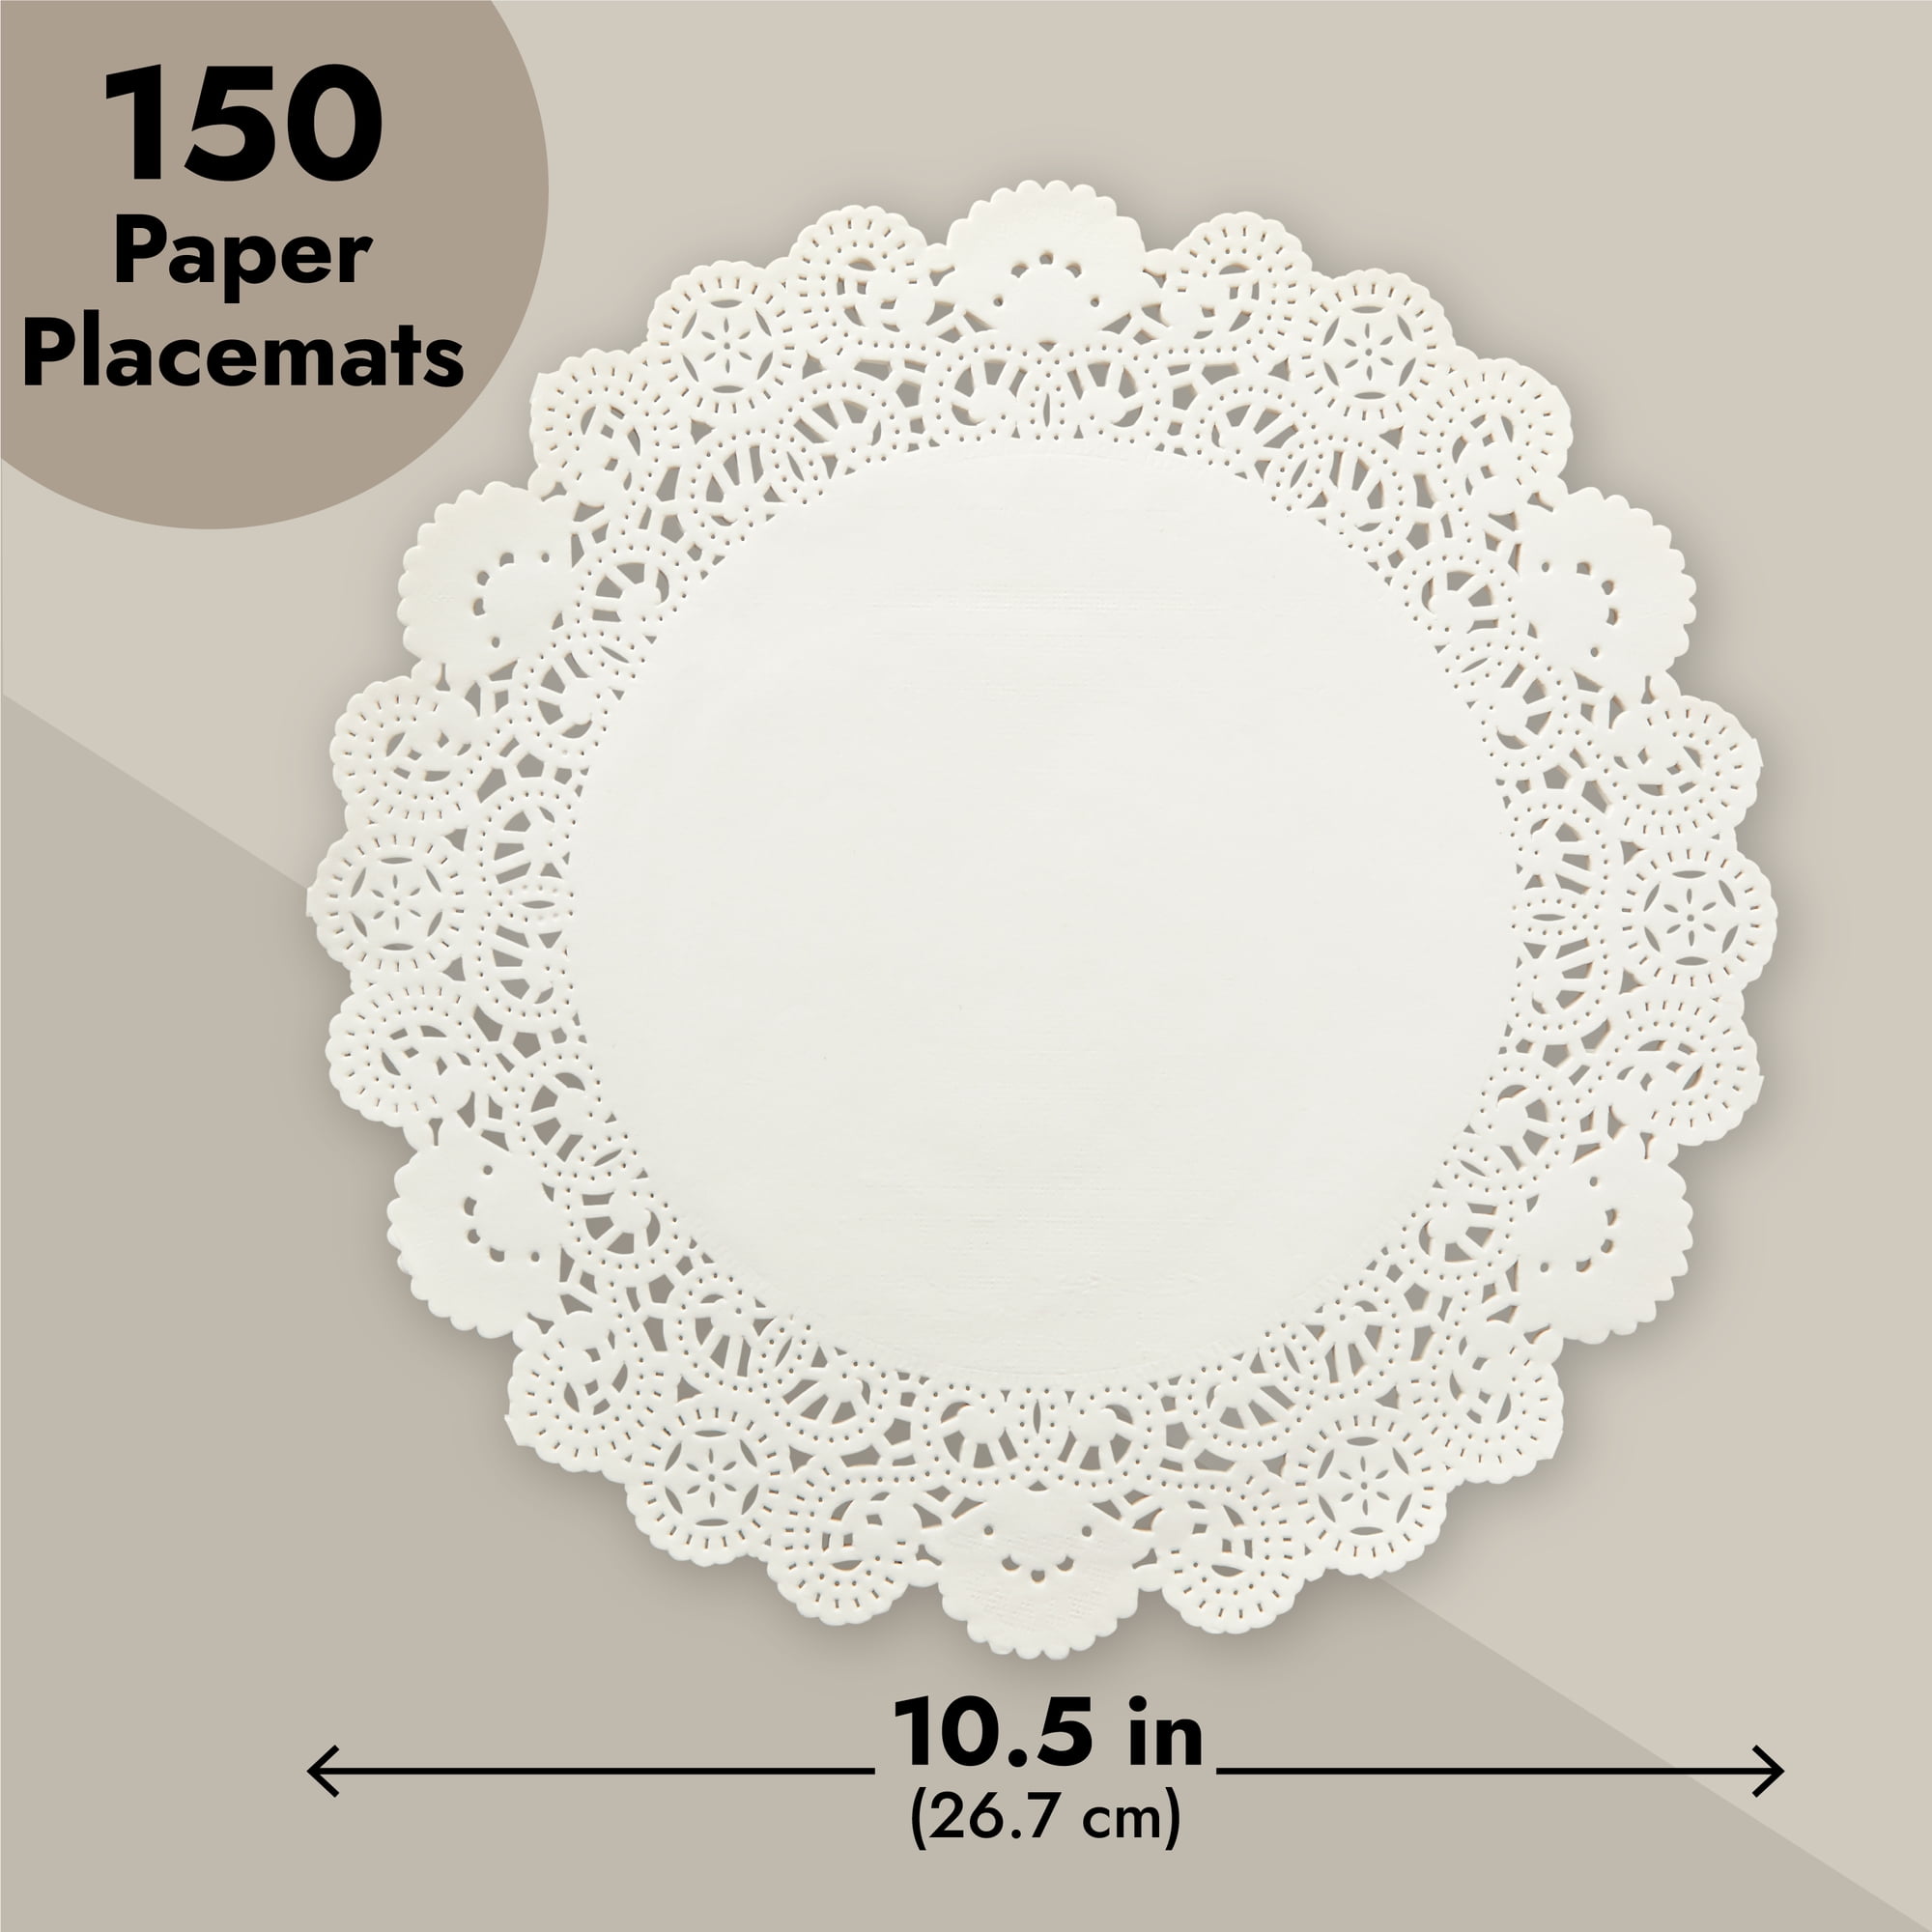 4 6 12 WHITE PAPER DOILIES Cambridge Round Lace Doily Paper Charger, Round  Placemats, Charger Plates, Invitation Doily 